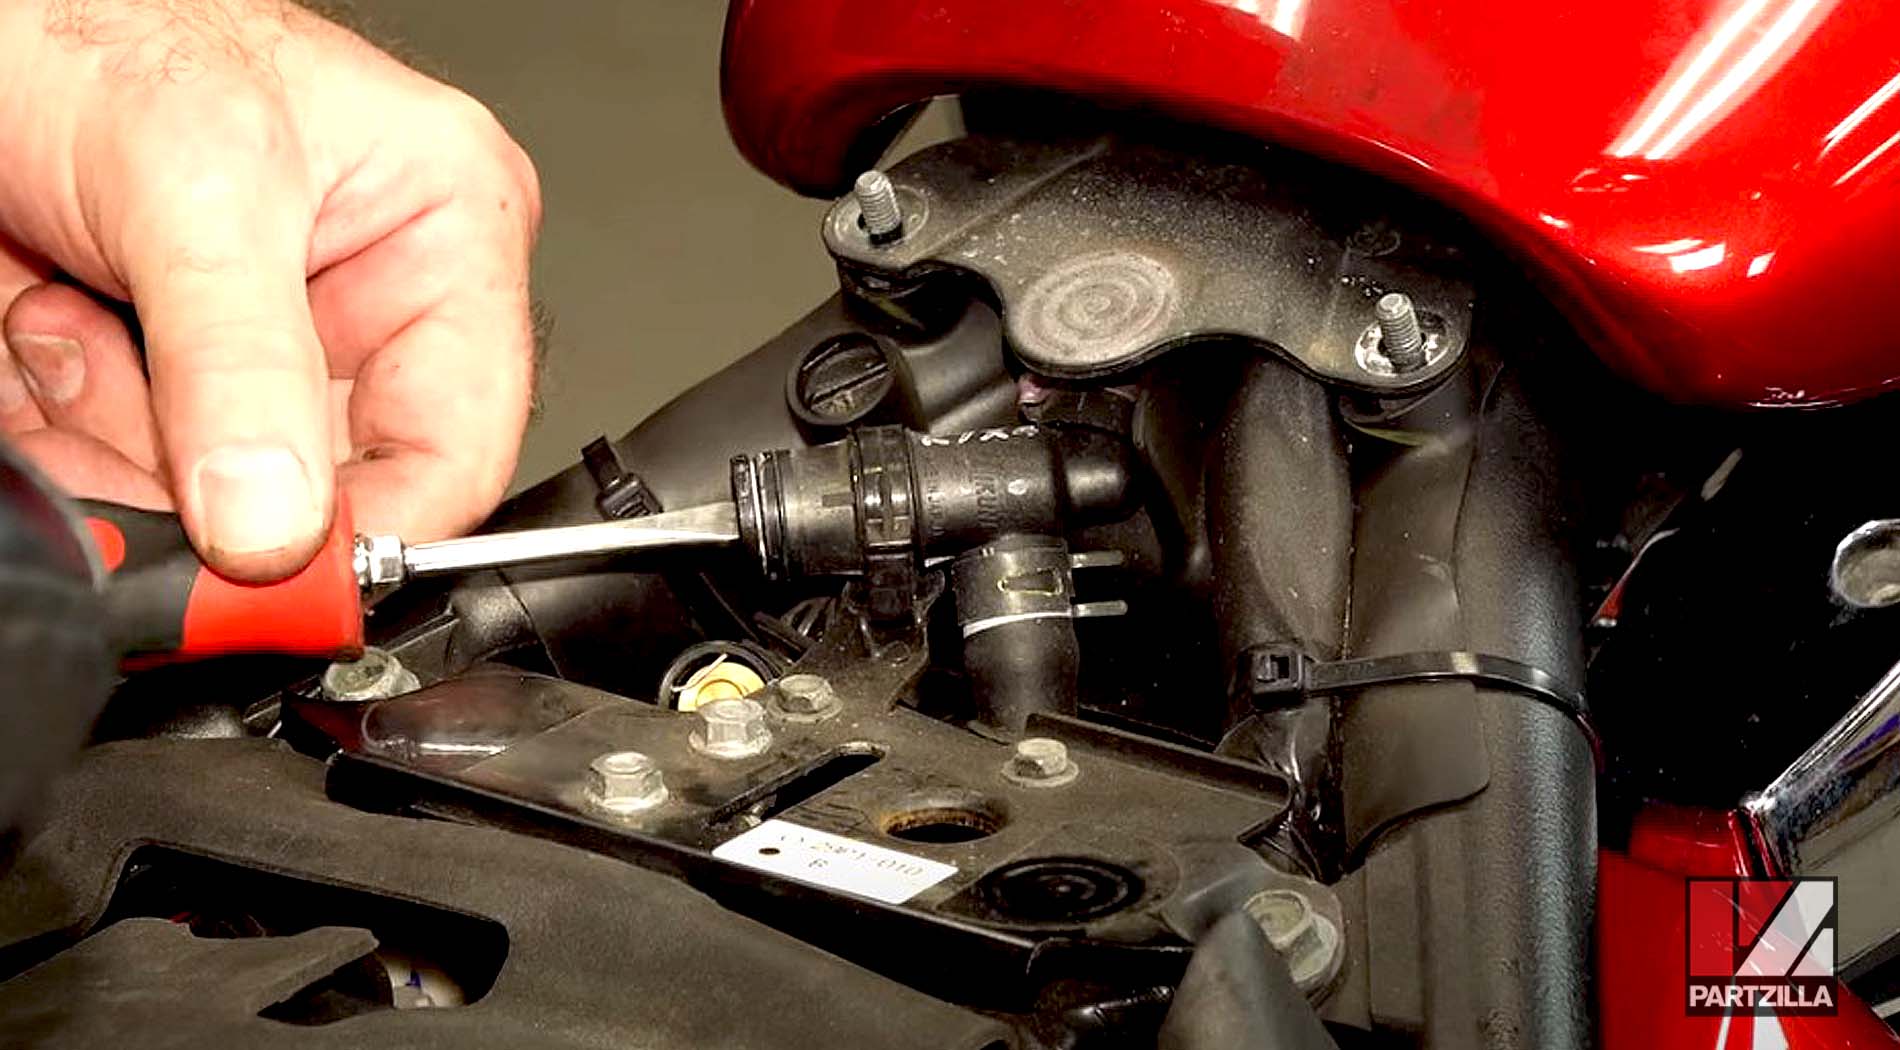 How to replace Yamaha Raider motorcycle spark plugs